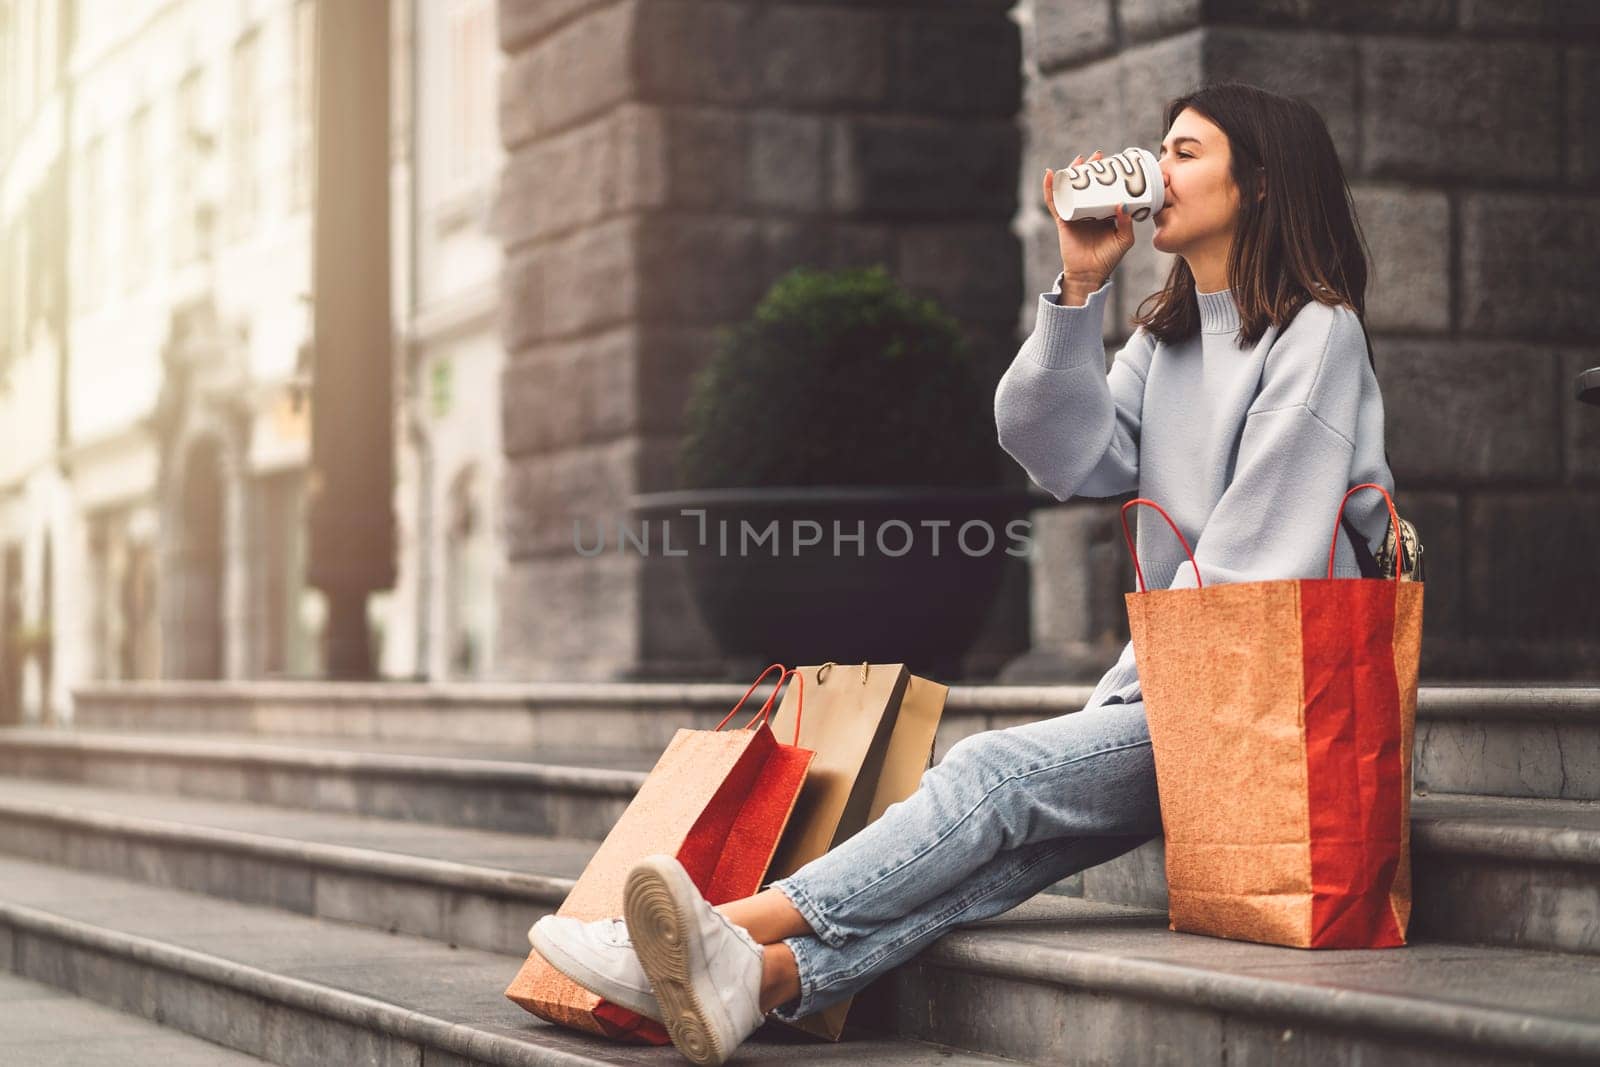 Two young caucasian women having fun on city street outdoors - Best friends enjoying a holiday day out together - Happy lifestyle, youth and young females concept. High quality photo